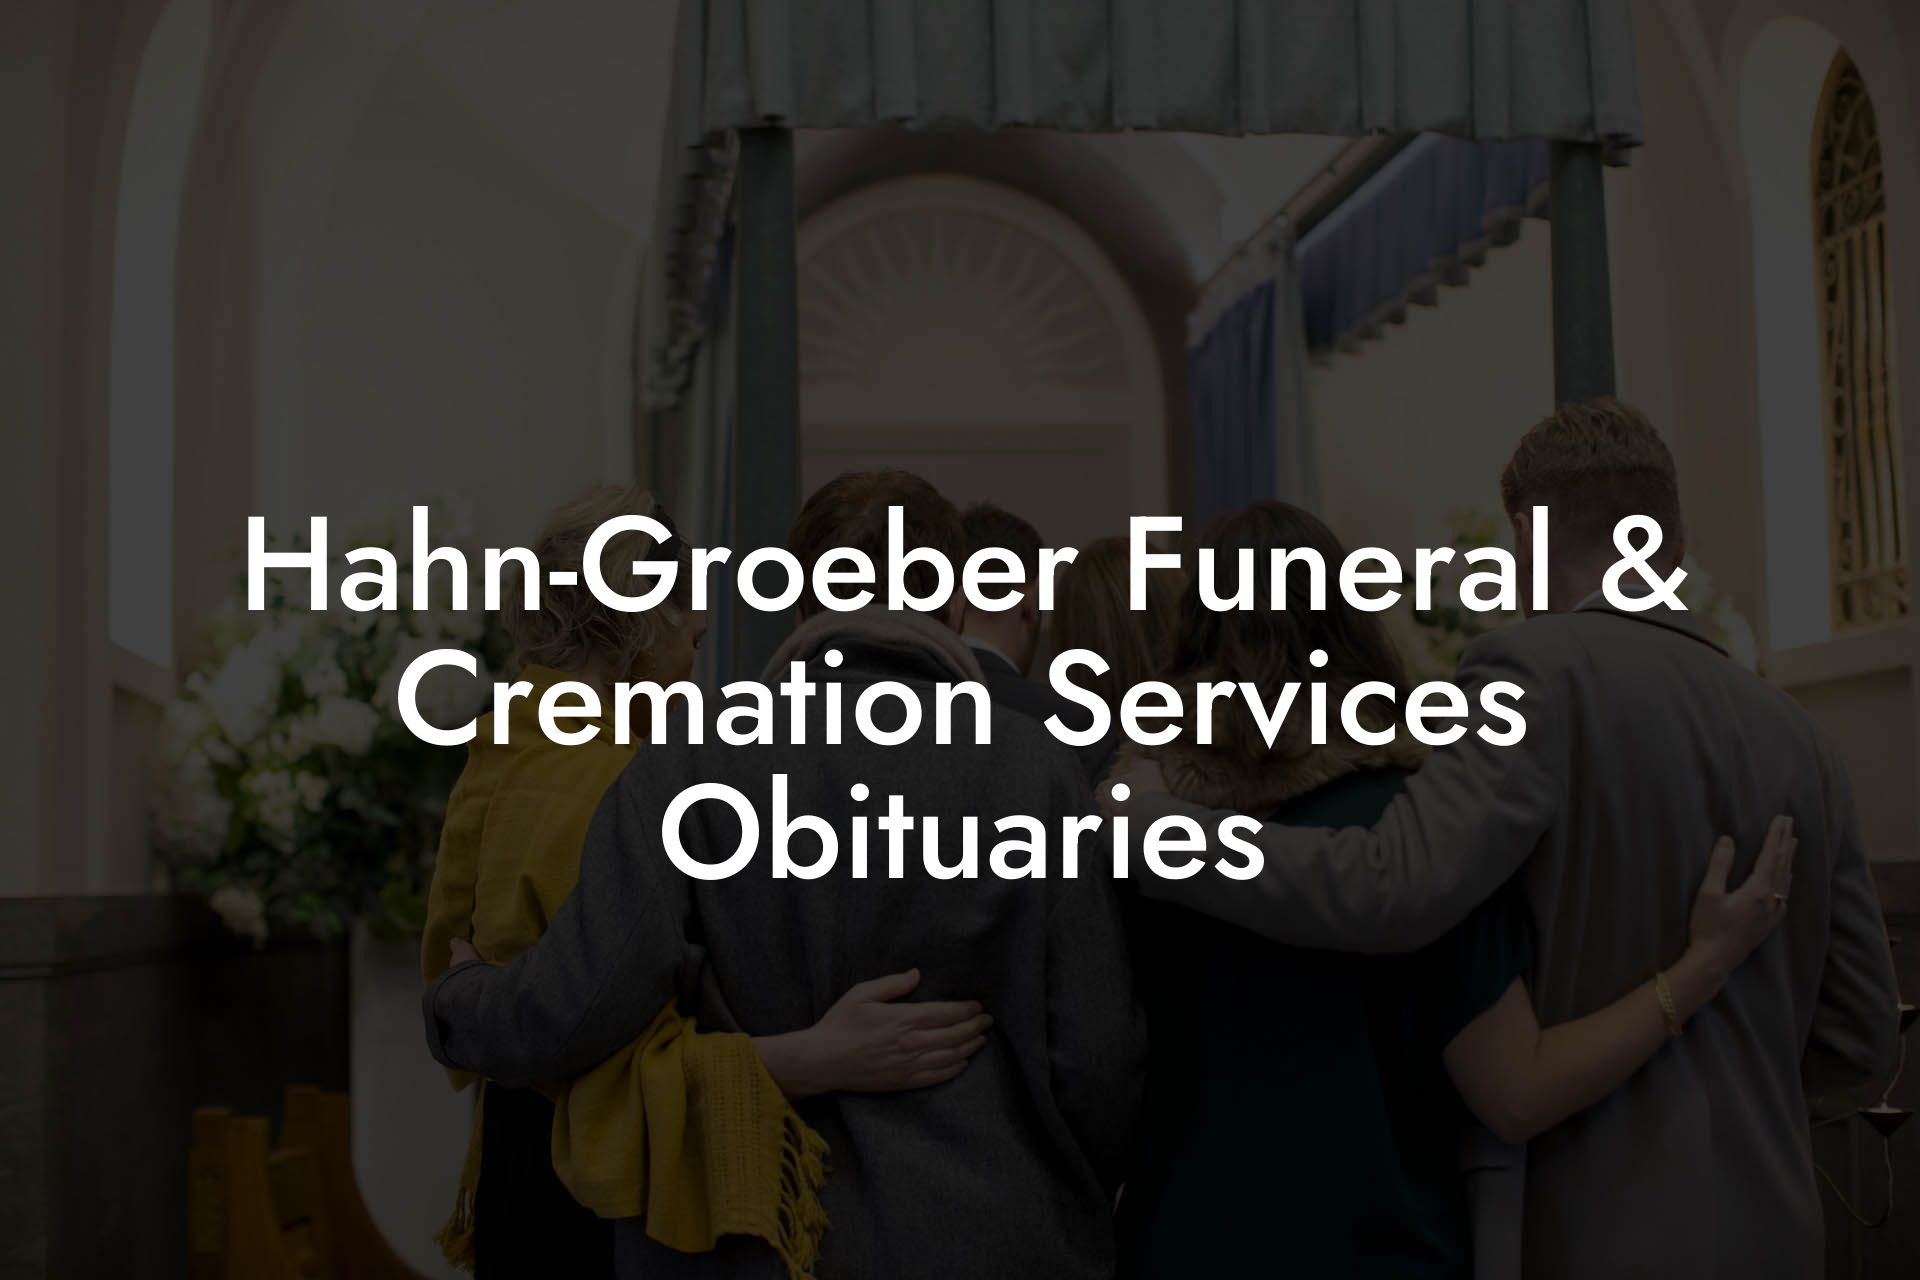 Hahn-Groeber Funeral & Cremation Services Obituaries